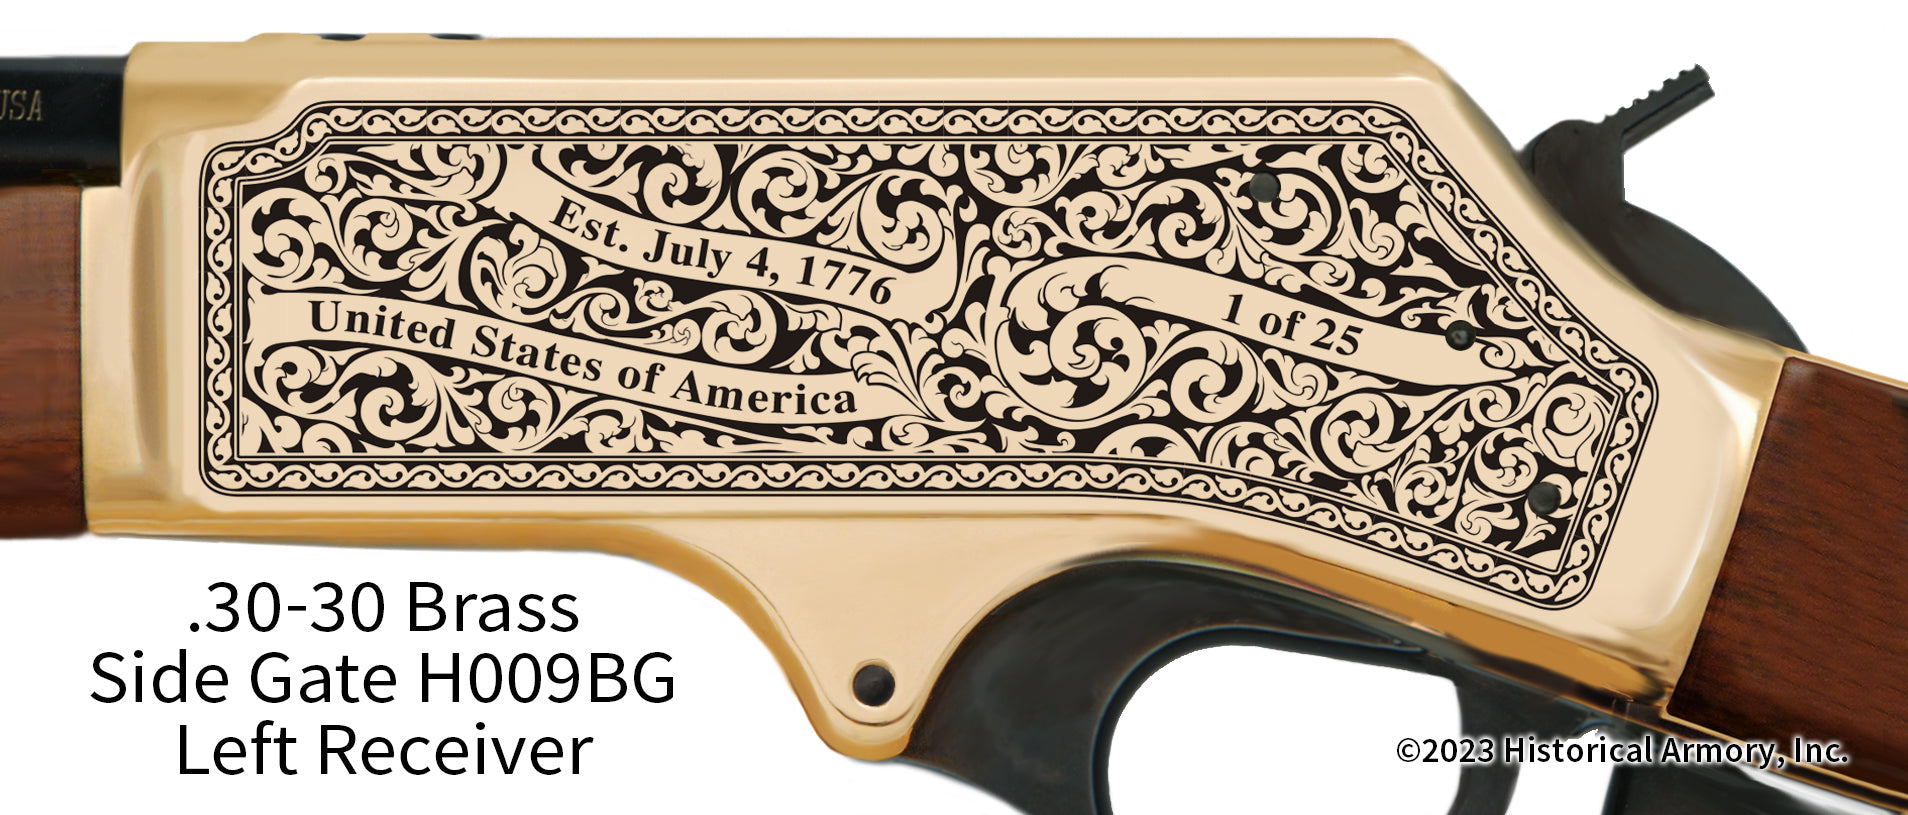 Sweetwater County Wyoming Engraved Henry .30-30 Brass Side Gate Rifle